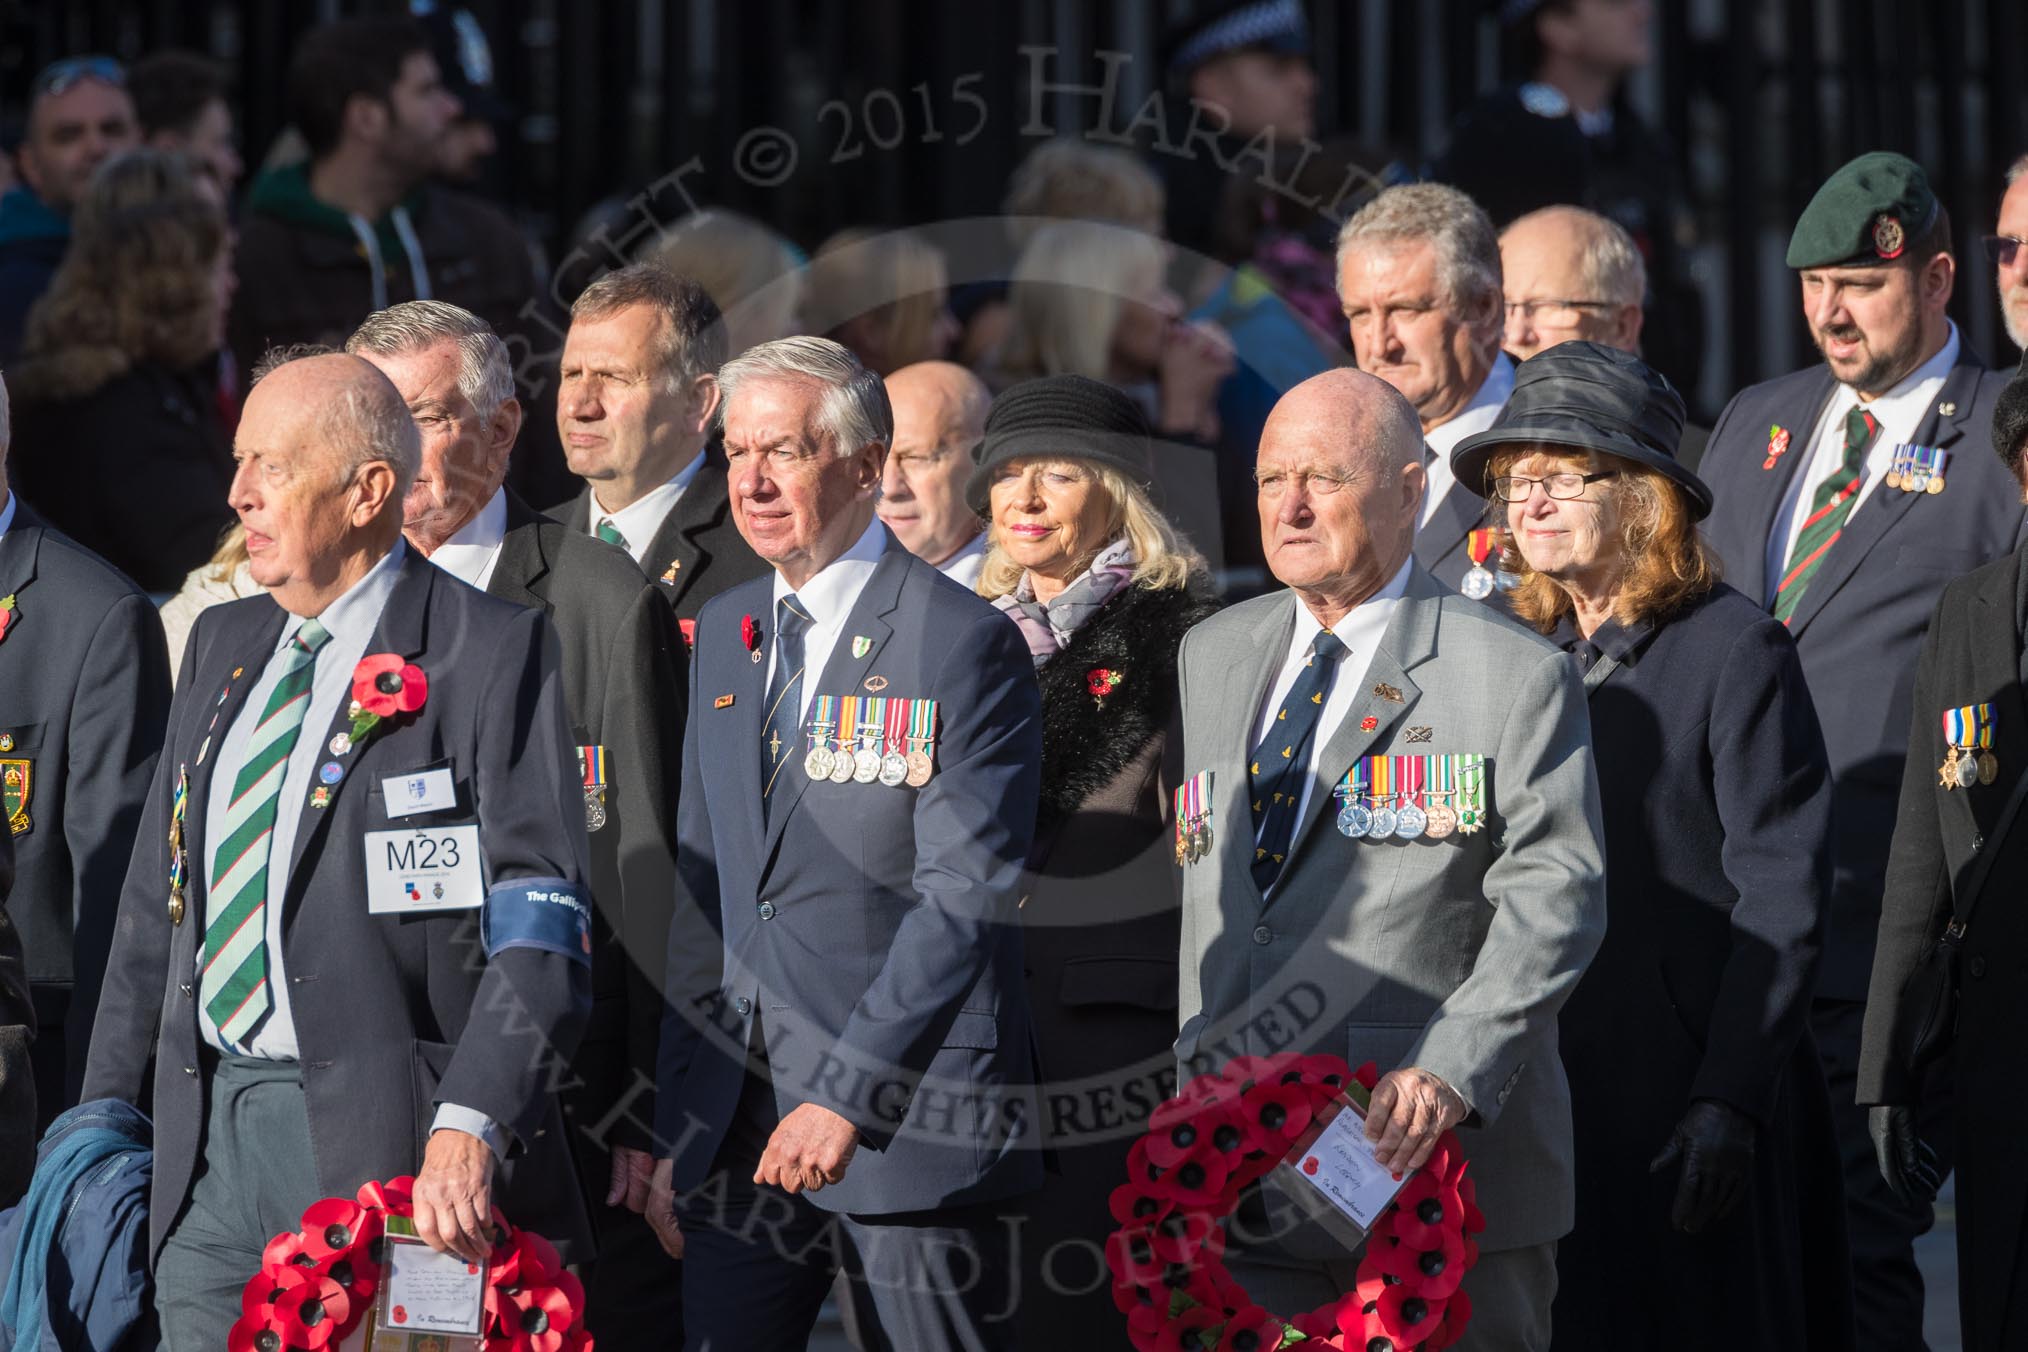 March Past, Remembrance Sunday at the Cenotaph 2016: M23 Gallipoli Association.
Cenotaph, Whitehall, London SW1,
London,
Greater London,
United Kingdom,
on 13 November 2016 at 13:16, image #2695